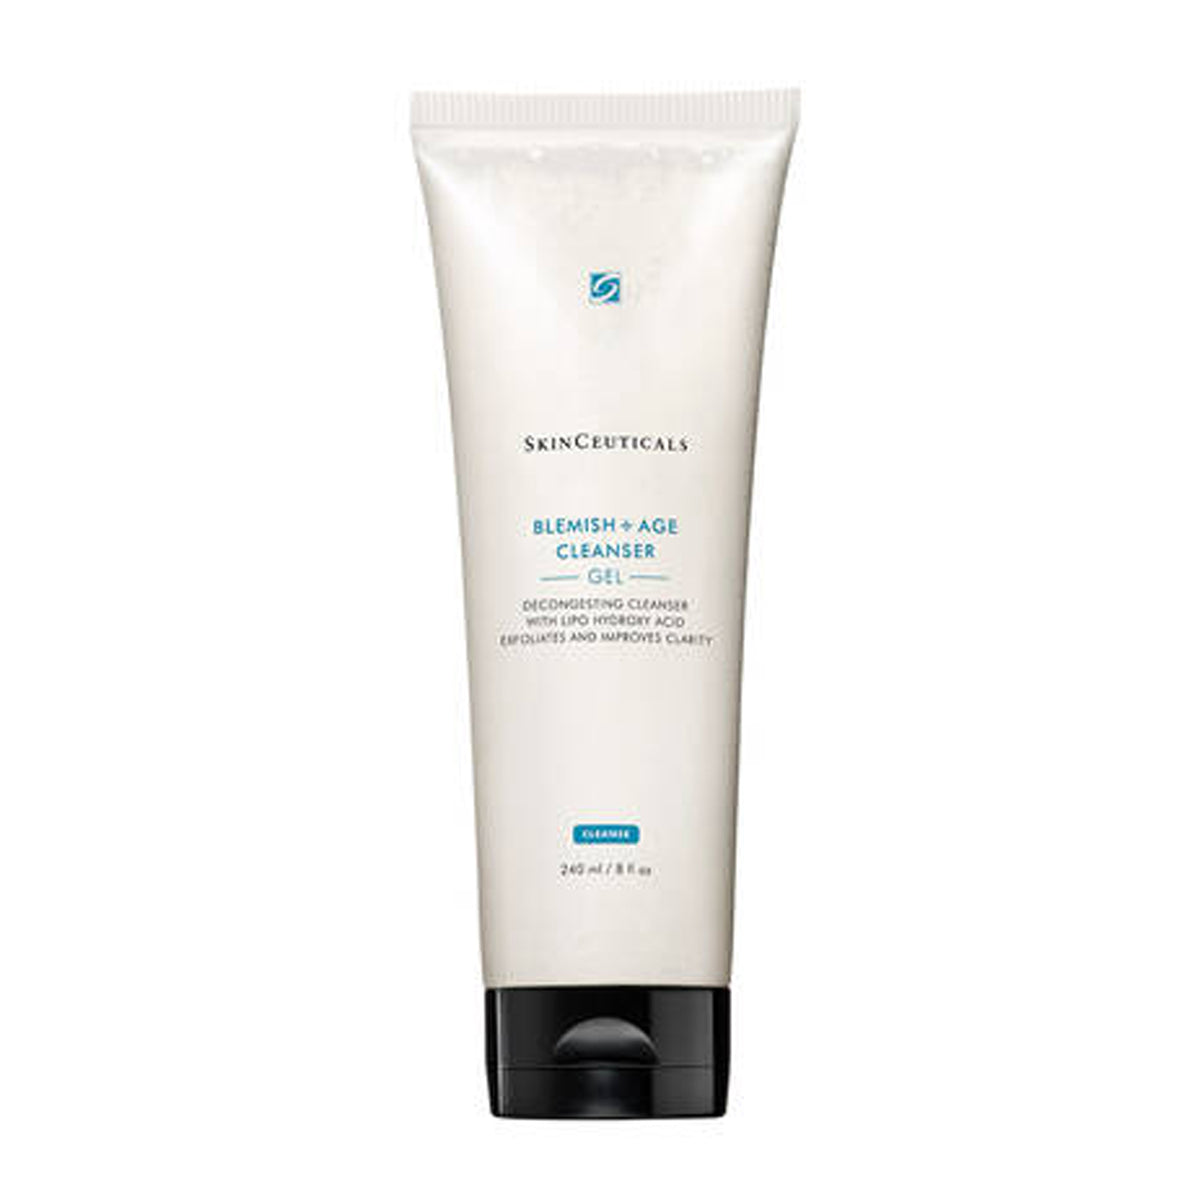 SKIN CEUTICALS BLEMISH AND AGE CLEANSER 240ML